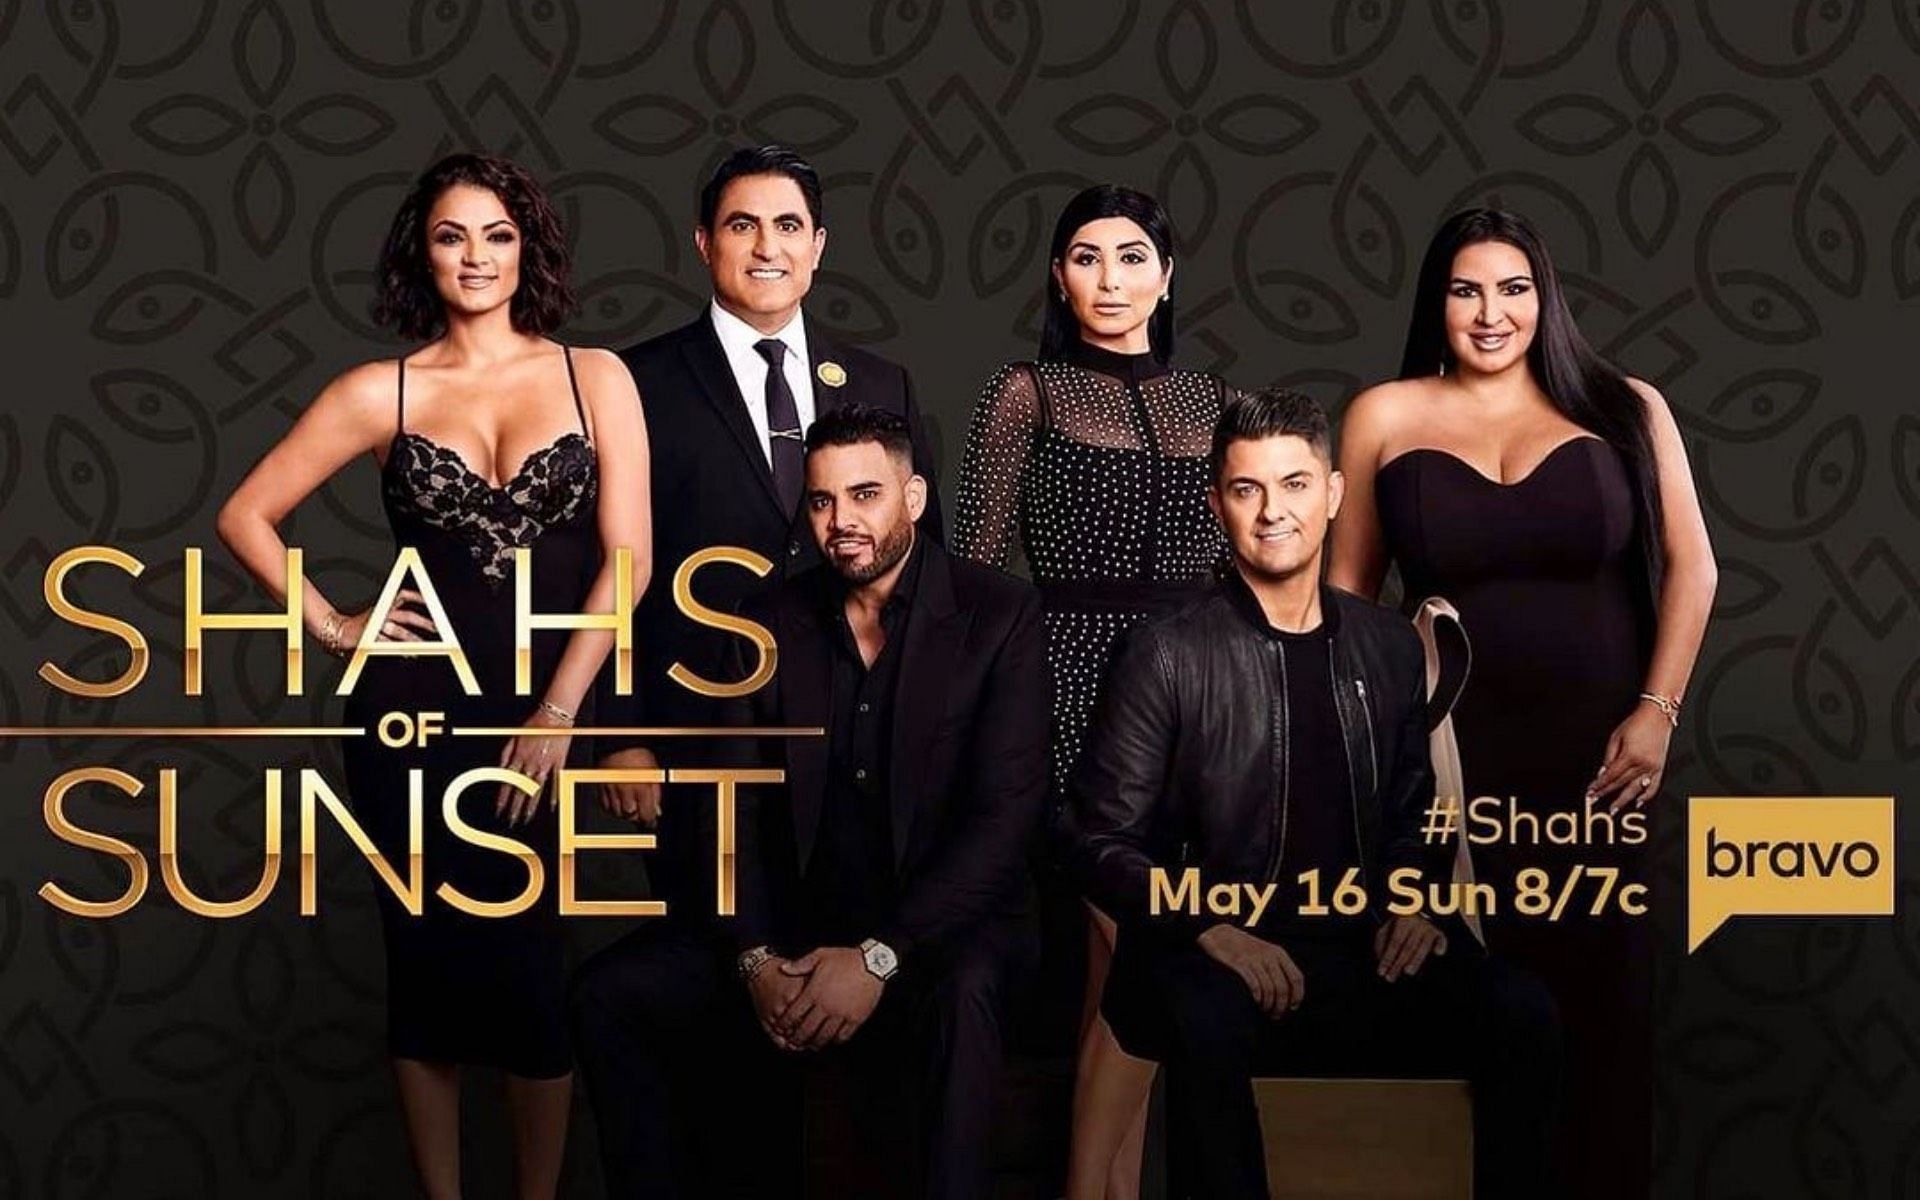 Shahs of Sunset officially ending after nine seasons (Image via Instagram/theshahsofsunset)